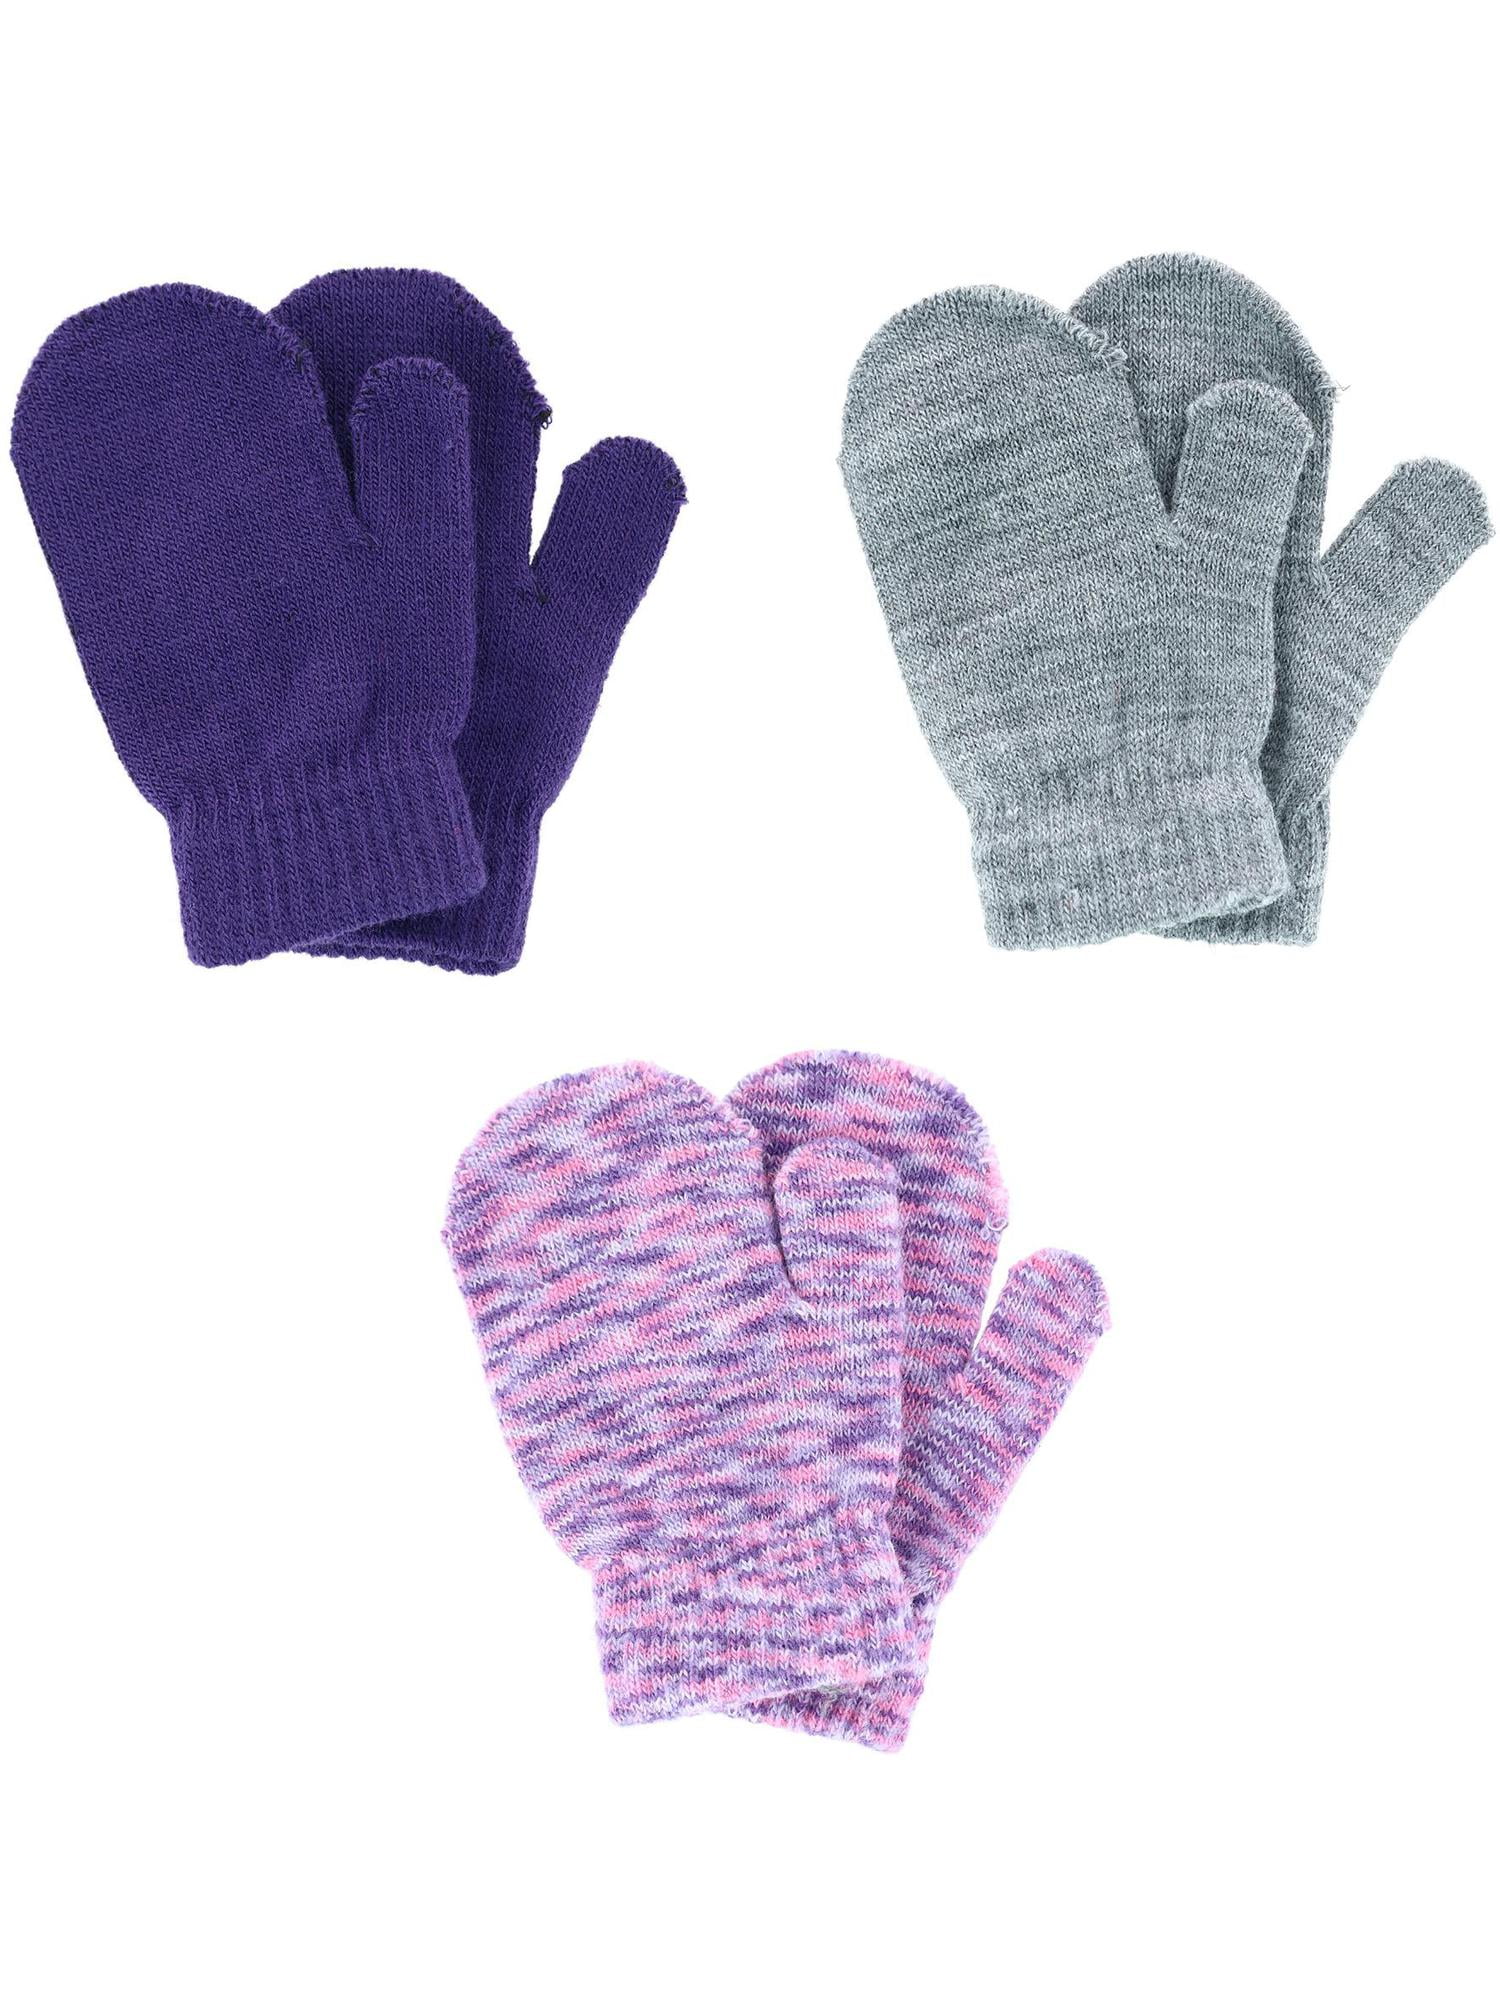 New Polar Extreme Girl's One Size Multi Knit Magic Gloves Pack of 3 